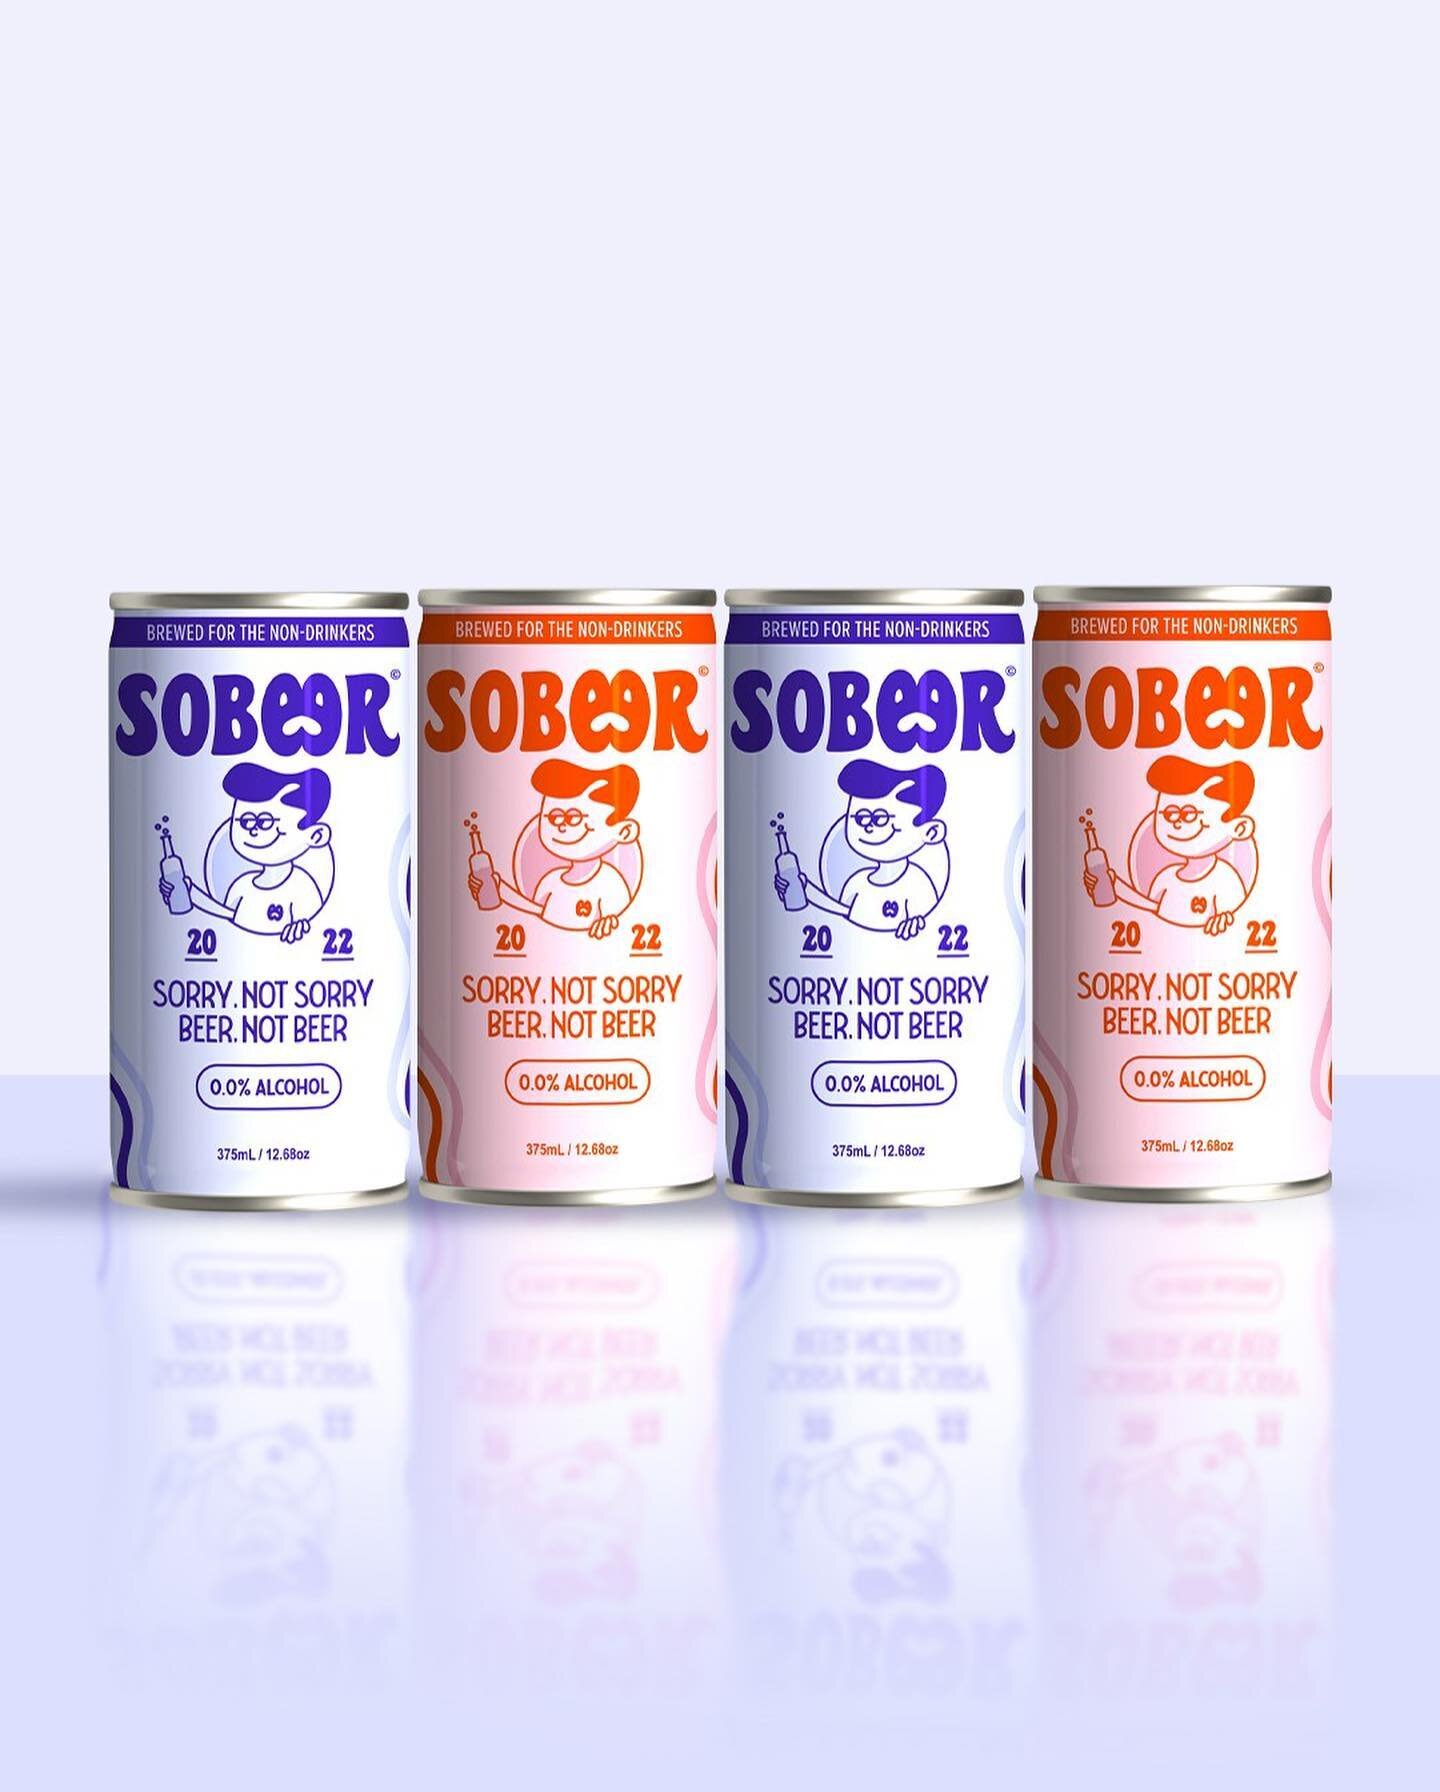 Stay Sober with Sobeer 👀✨ A non-alcoholic beer. Let me know what you think! 😉
.
.
.
.
.
.
.
#tbtsobeer #thebrieftribe #moodboard #passionproject #brief #freelancer #illustrator #logodesigns #branding #designchallenge #branddesigner #branddesign #de